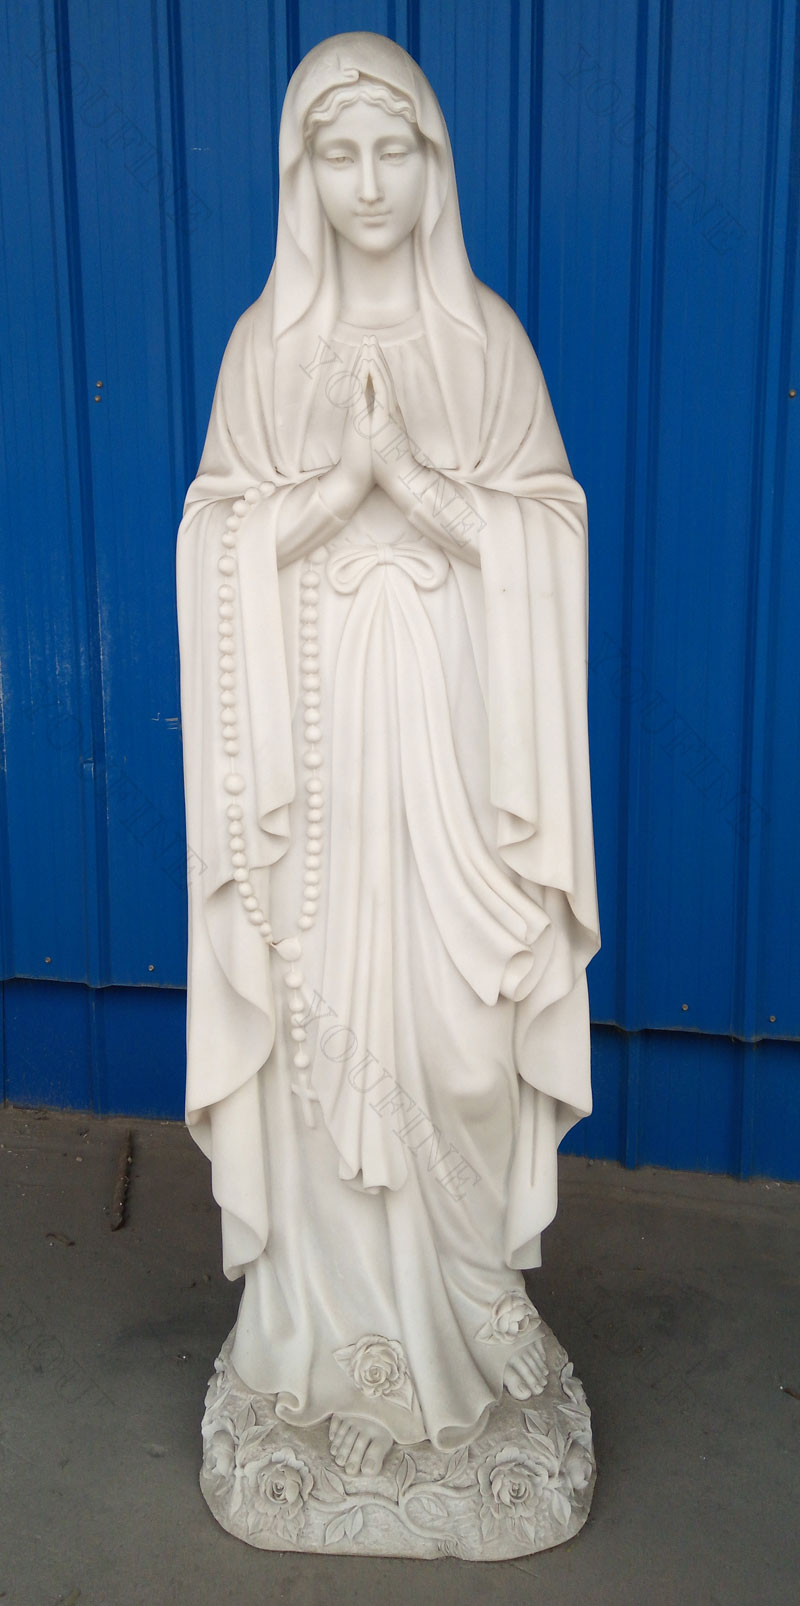 Catholic blessed virgin mary garden statues designs